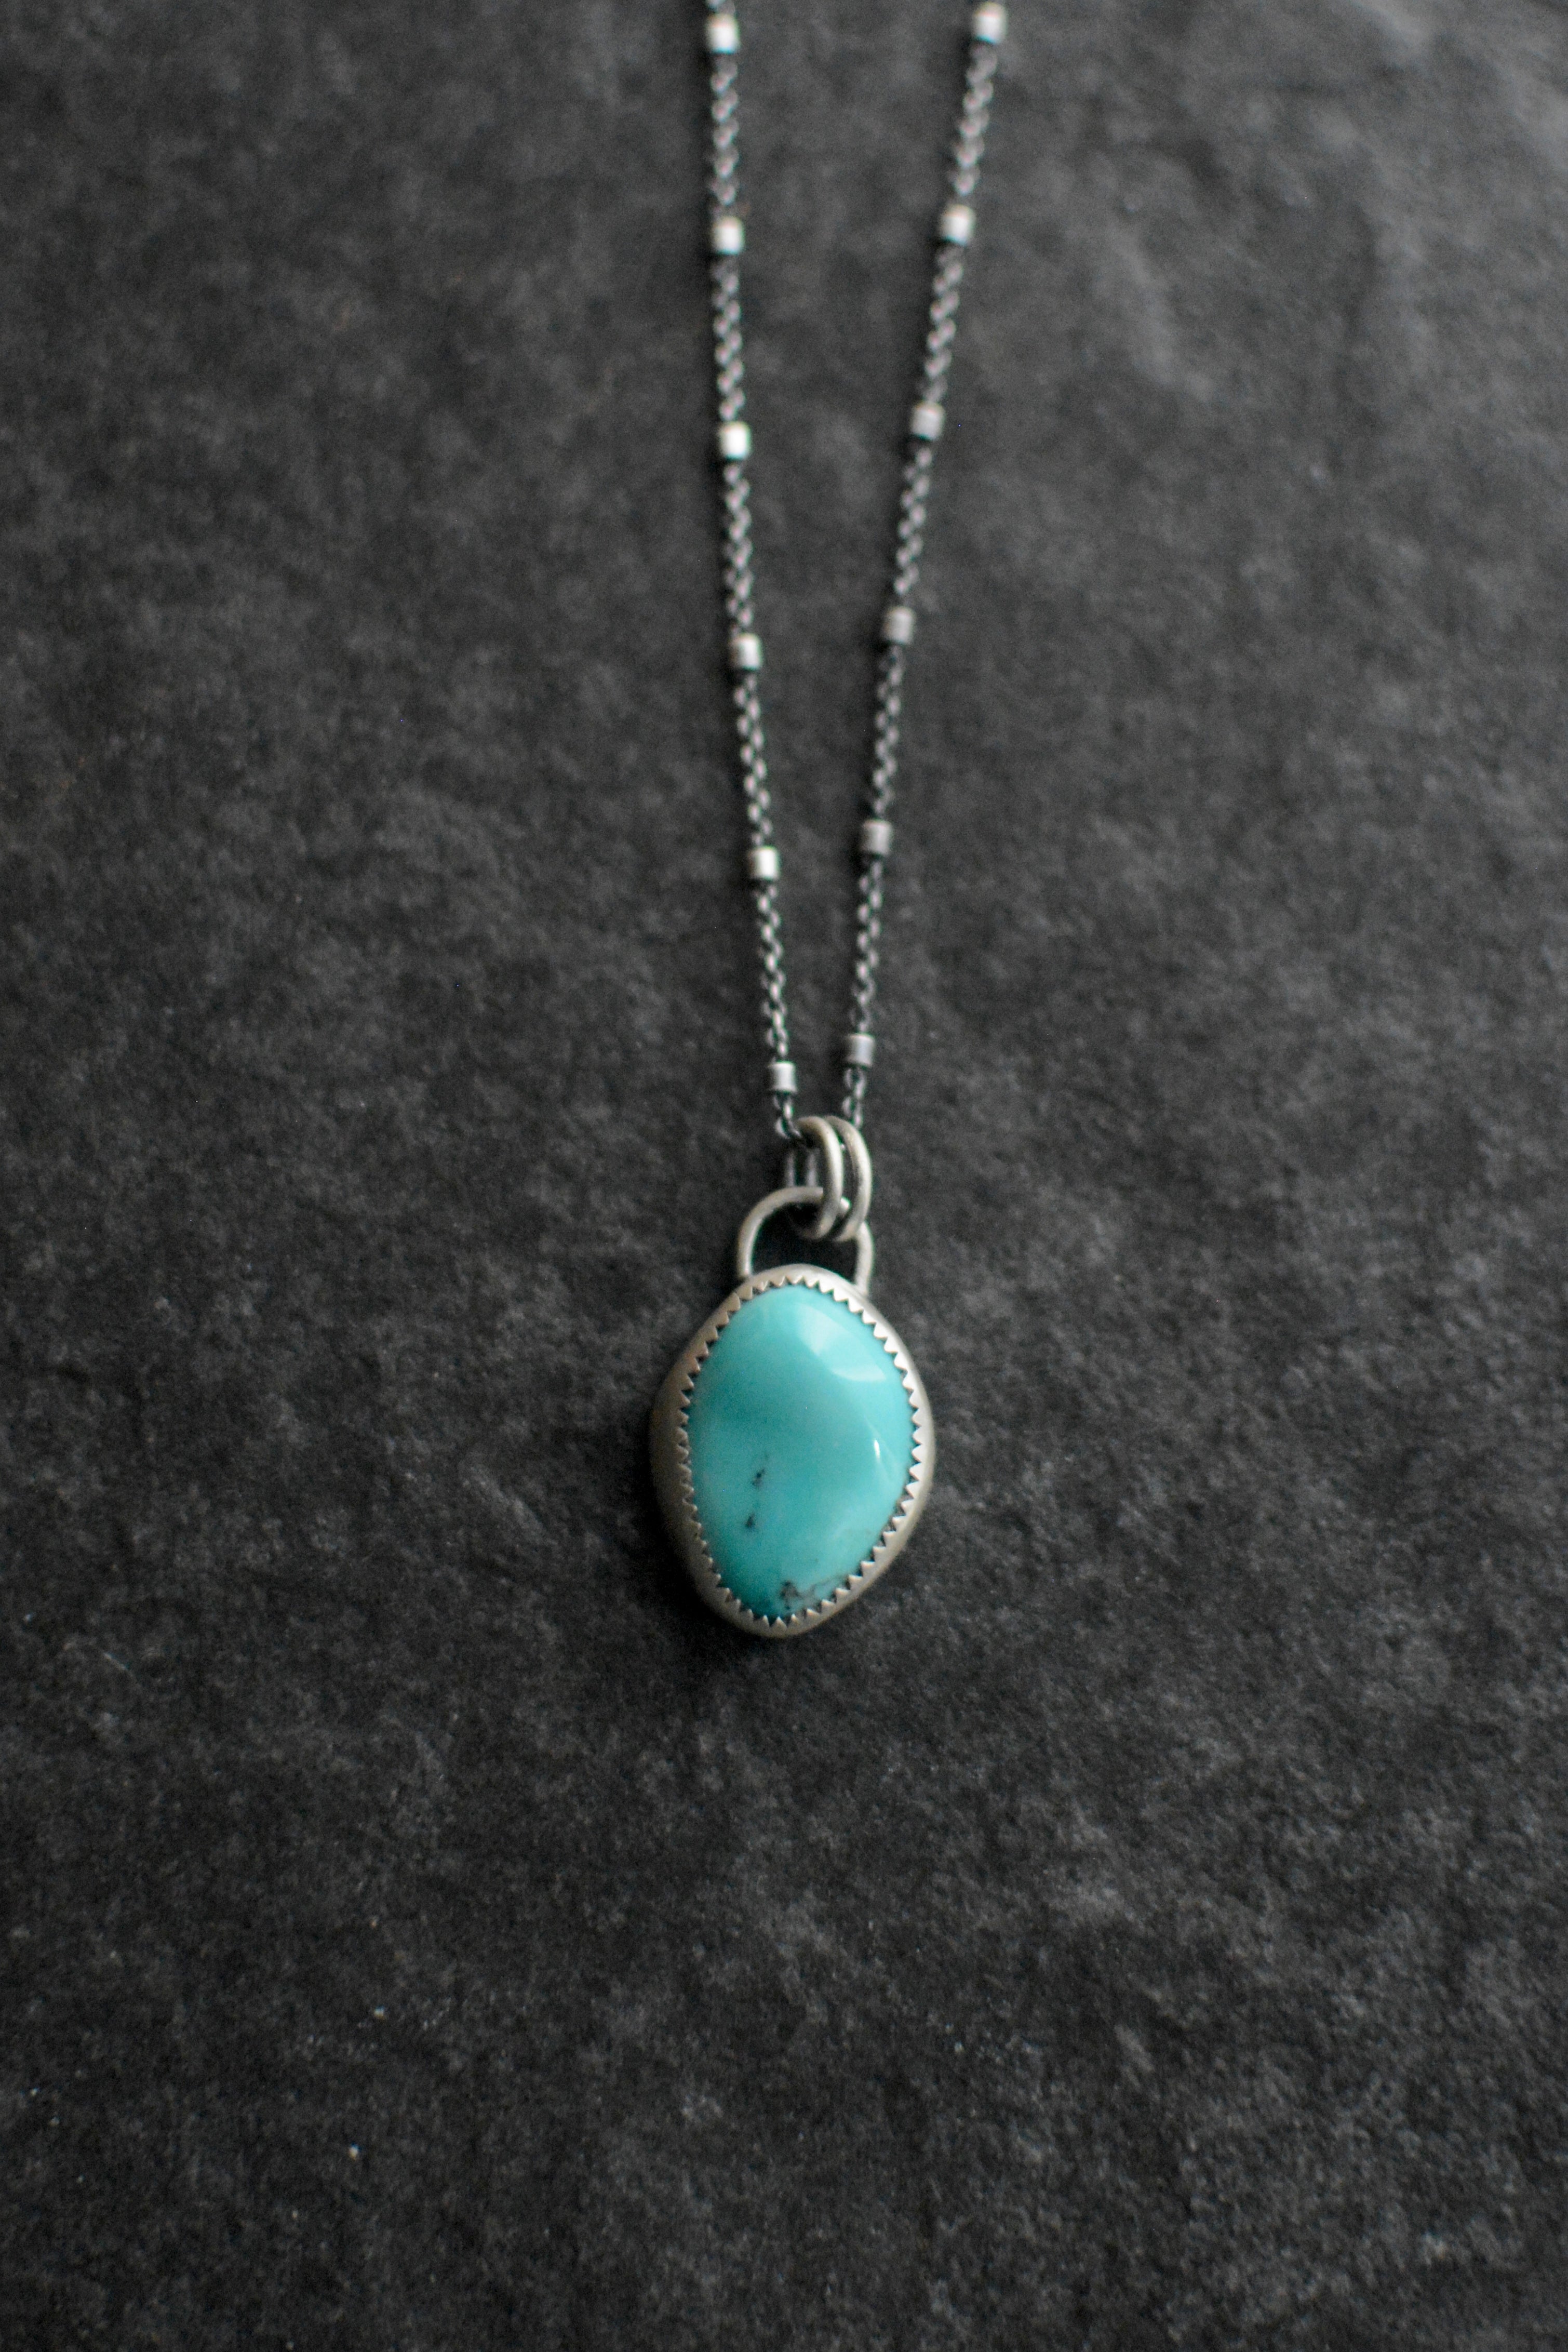 Campitos Turquoise Necklace - No. 3